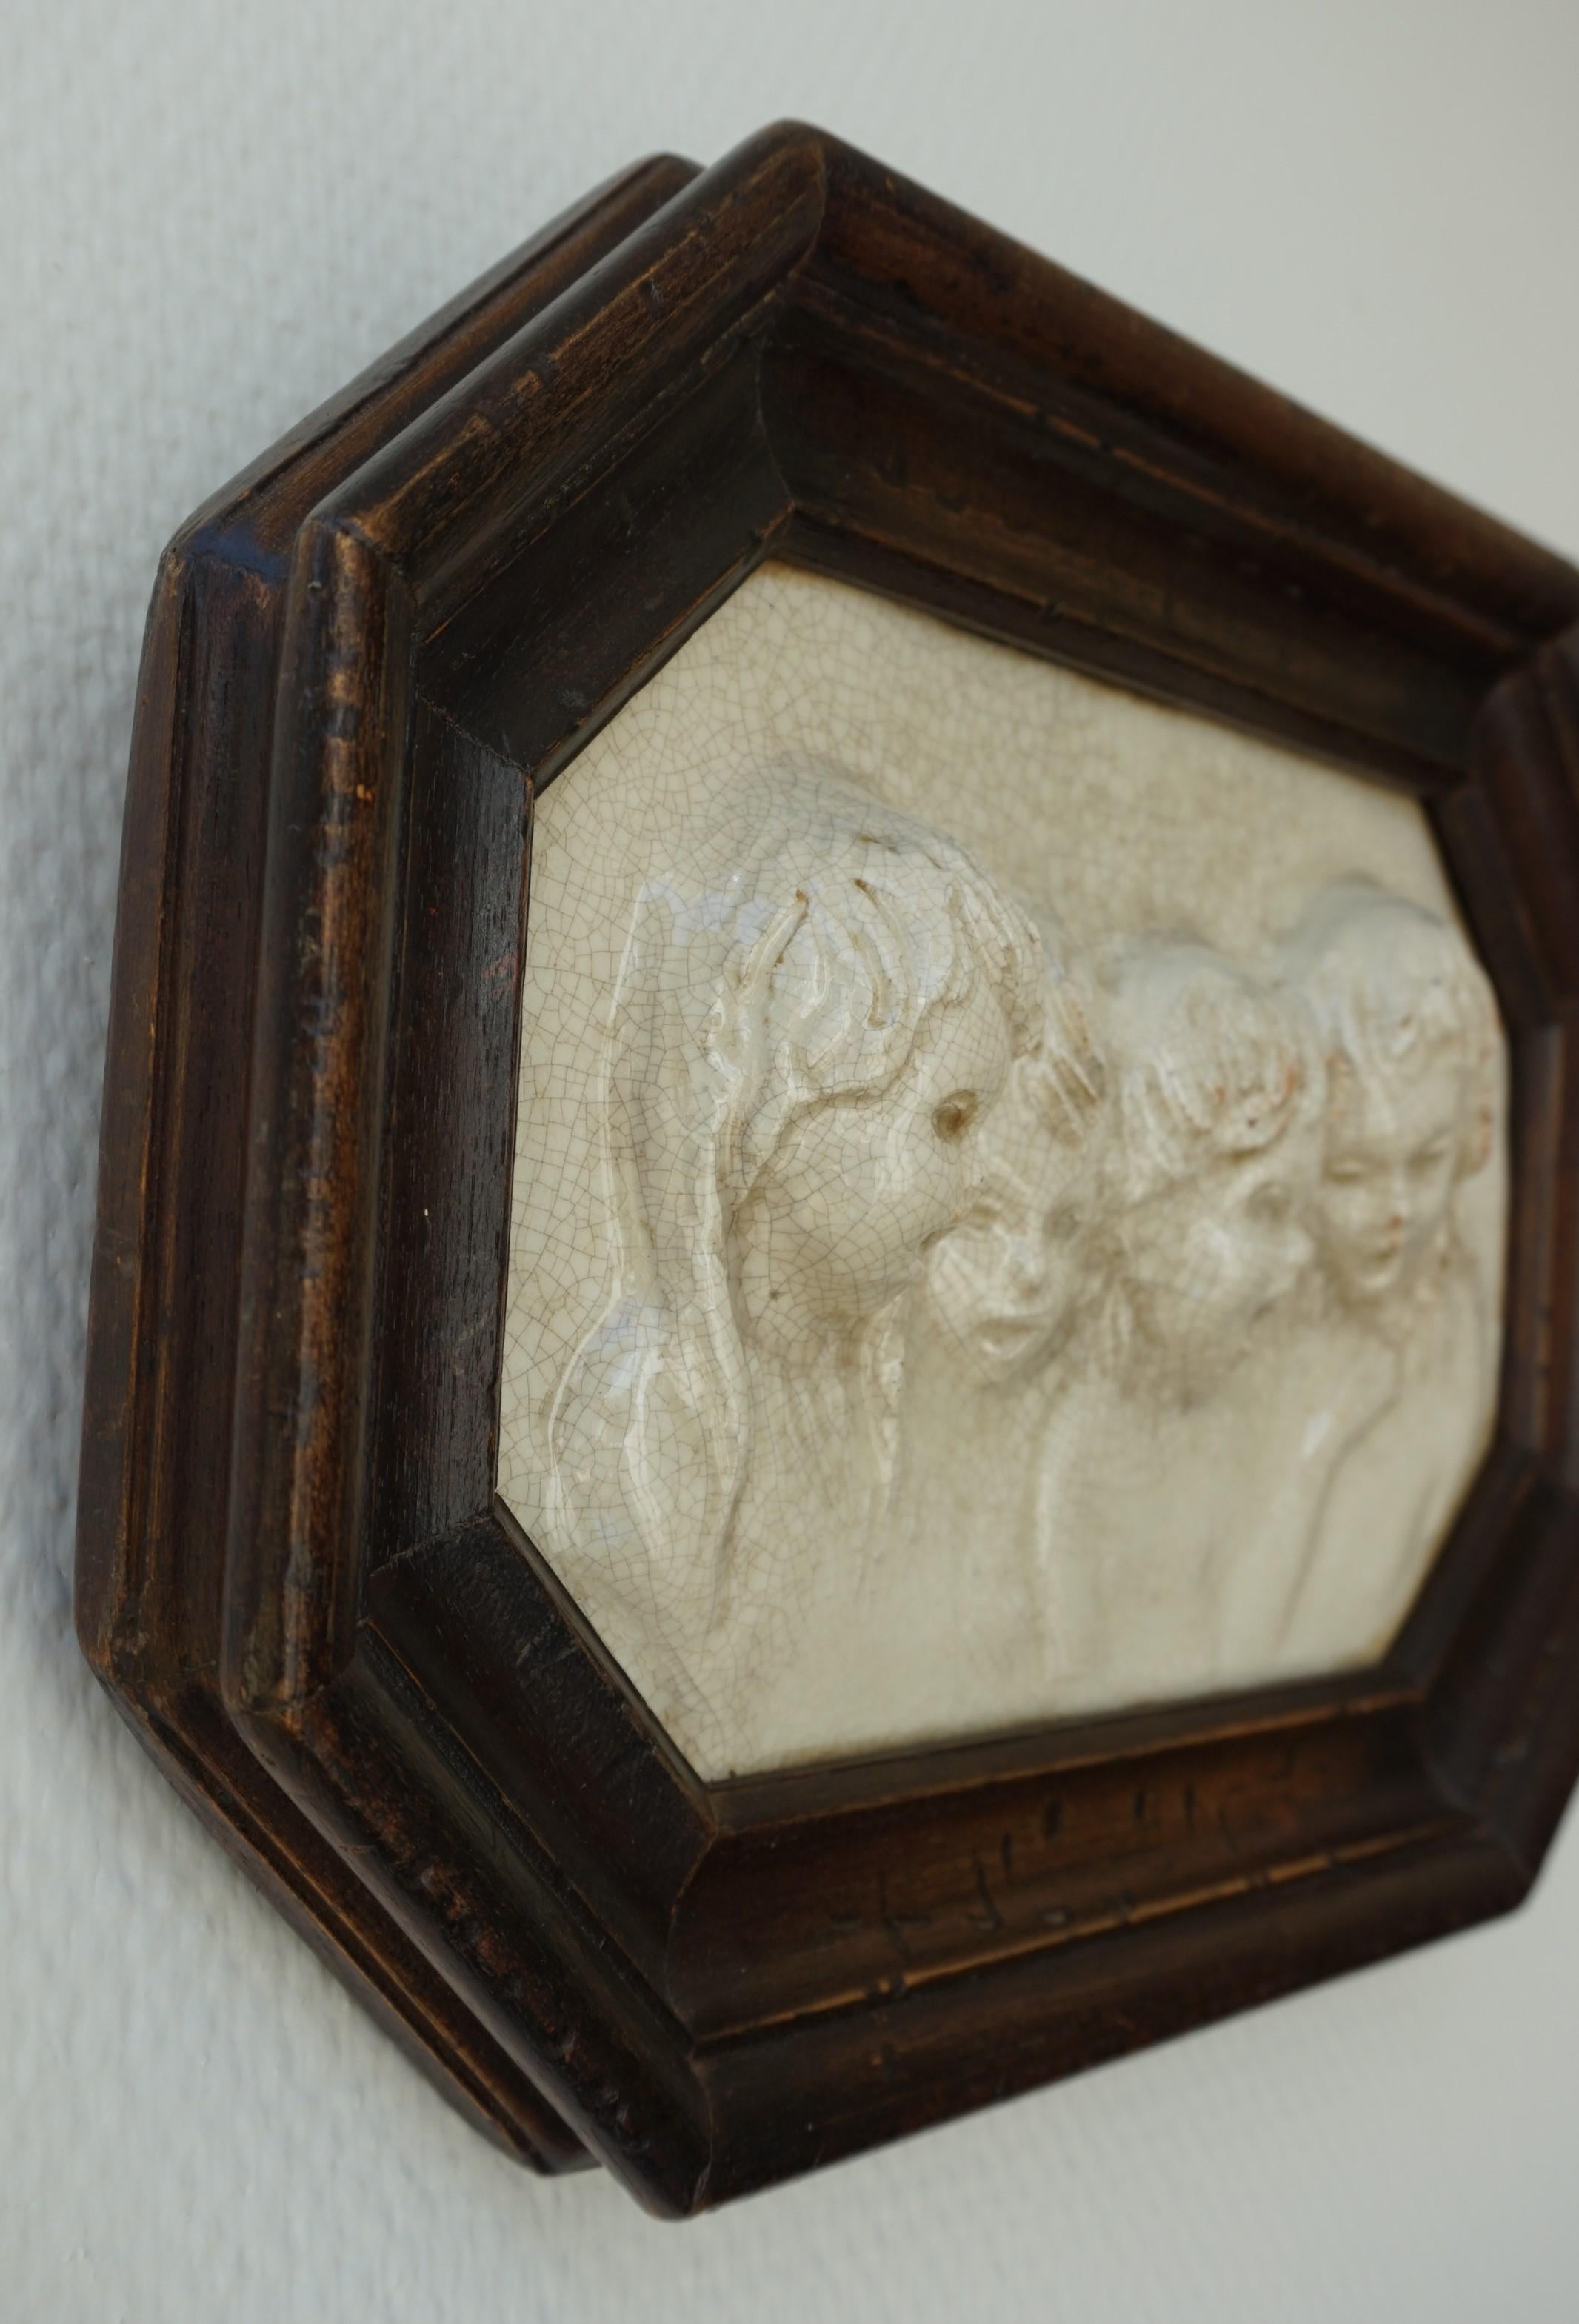 European Antique Tile in Frame with Devout Singing Angelic Children Sculptures in Relief For Sale